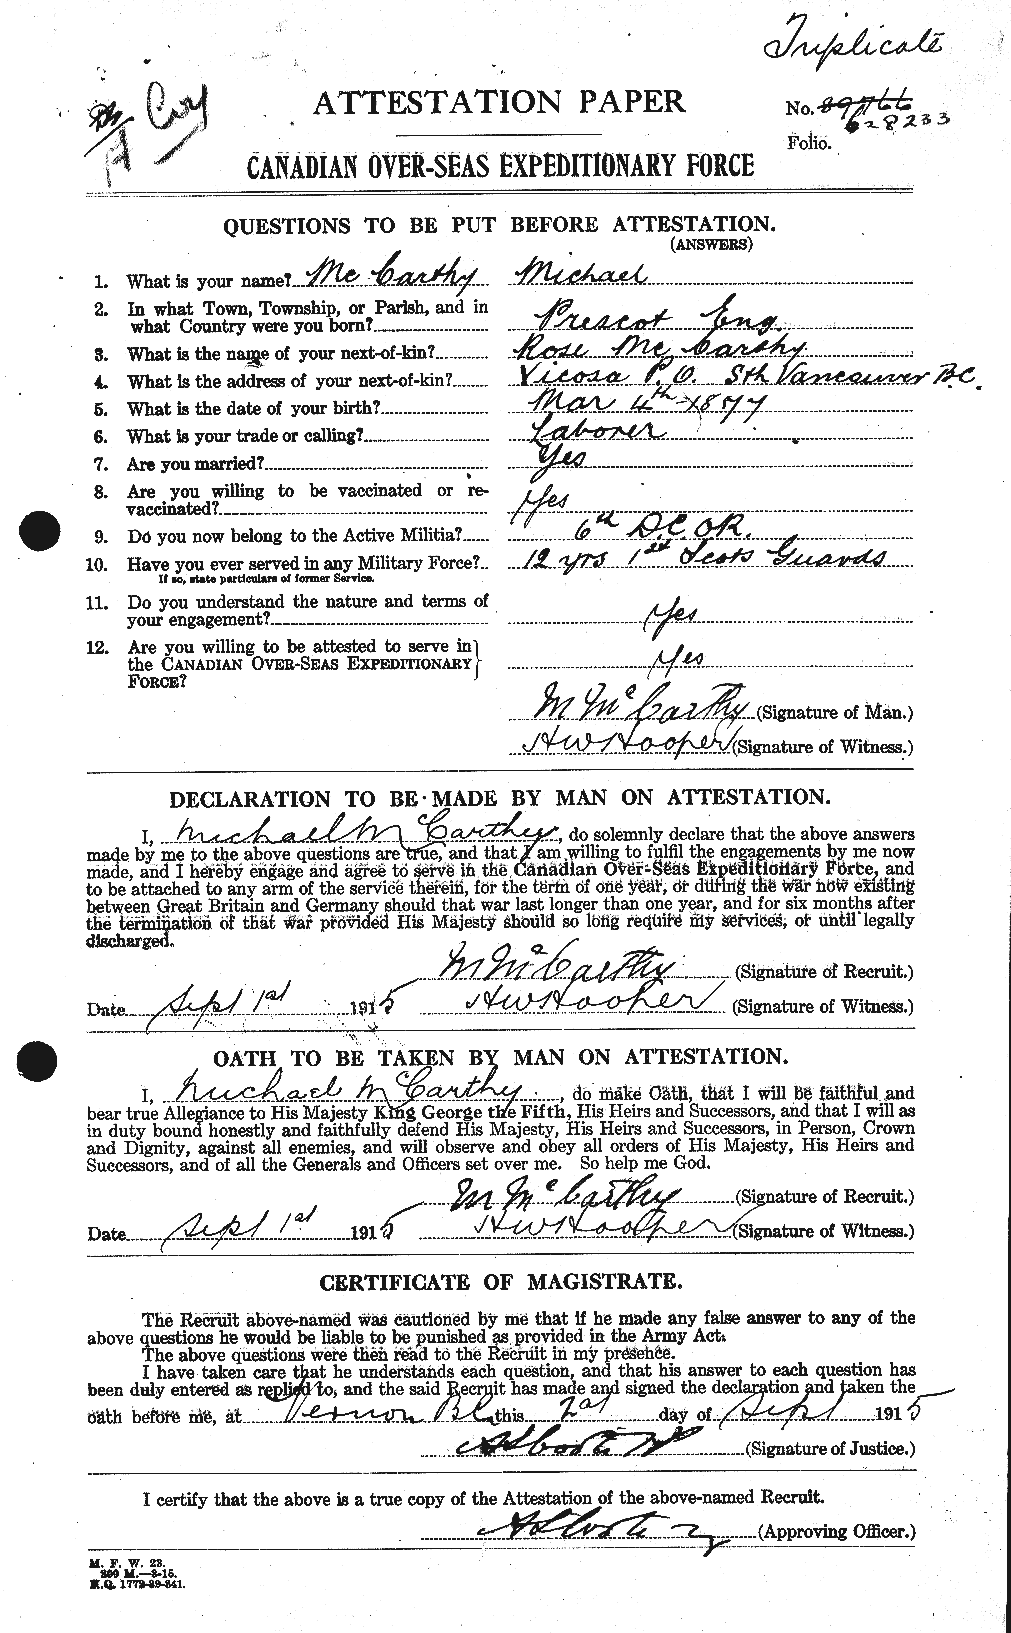 Personnel Records of the First World War - CEF 133885a